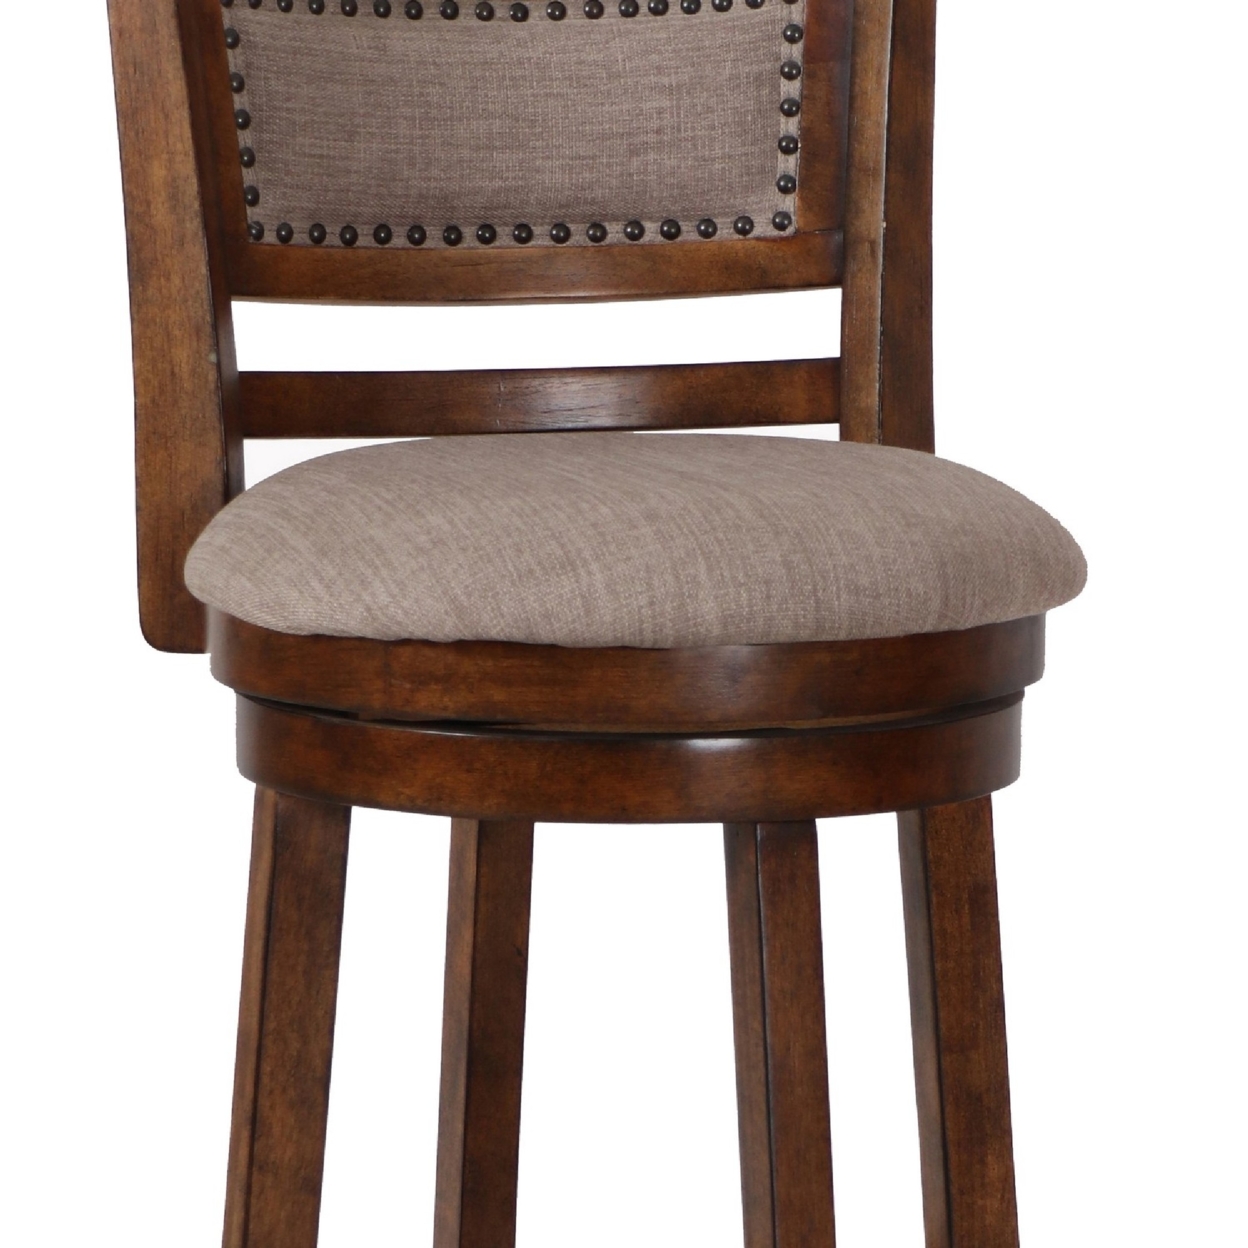 Curved Swivel Barstool With Fabric Padded Seating, Brown And Beige- Saltoro Sherpi